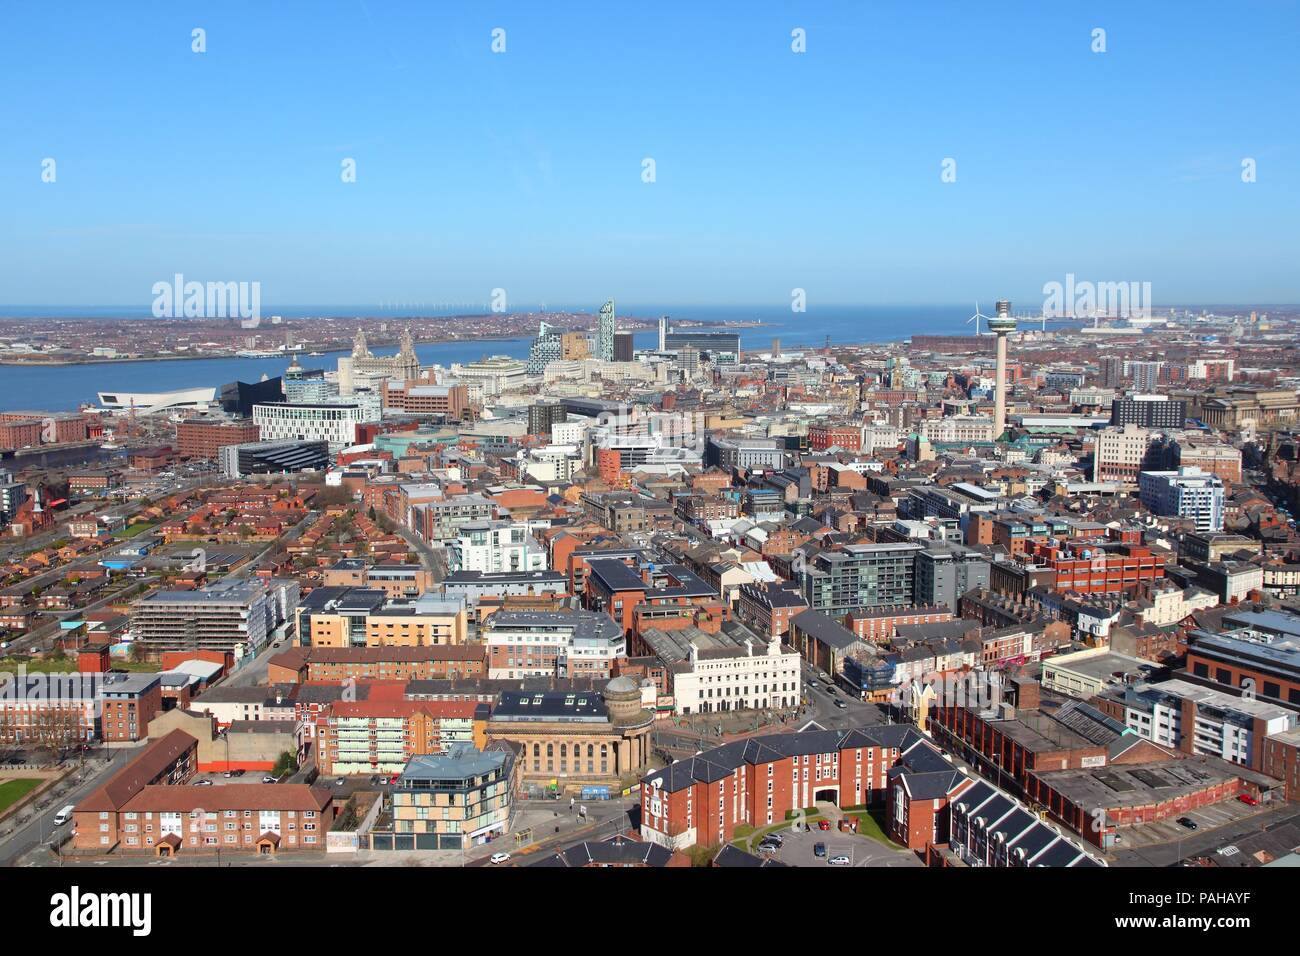 Liverpool City In Merseyside County Of North West England Uk Aerial View With Downtown And Famous Pier Head Unesco World Heritage Site Stock Photo Alamy